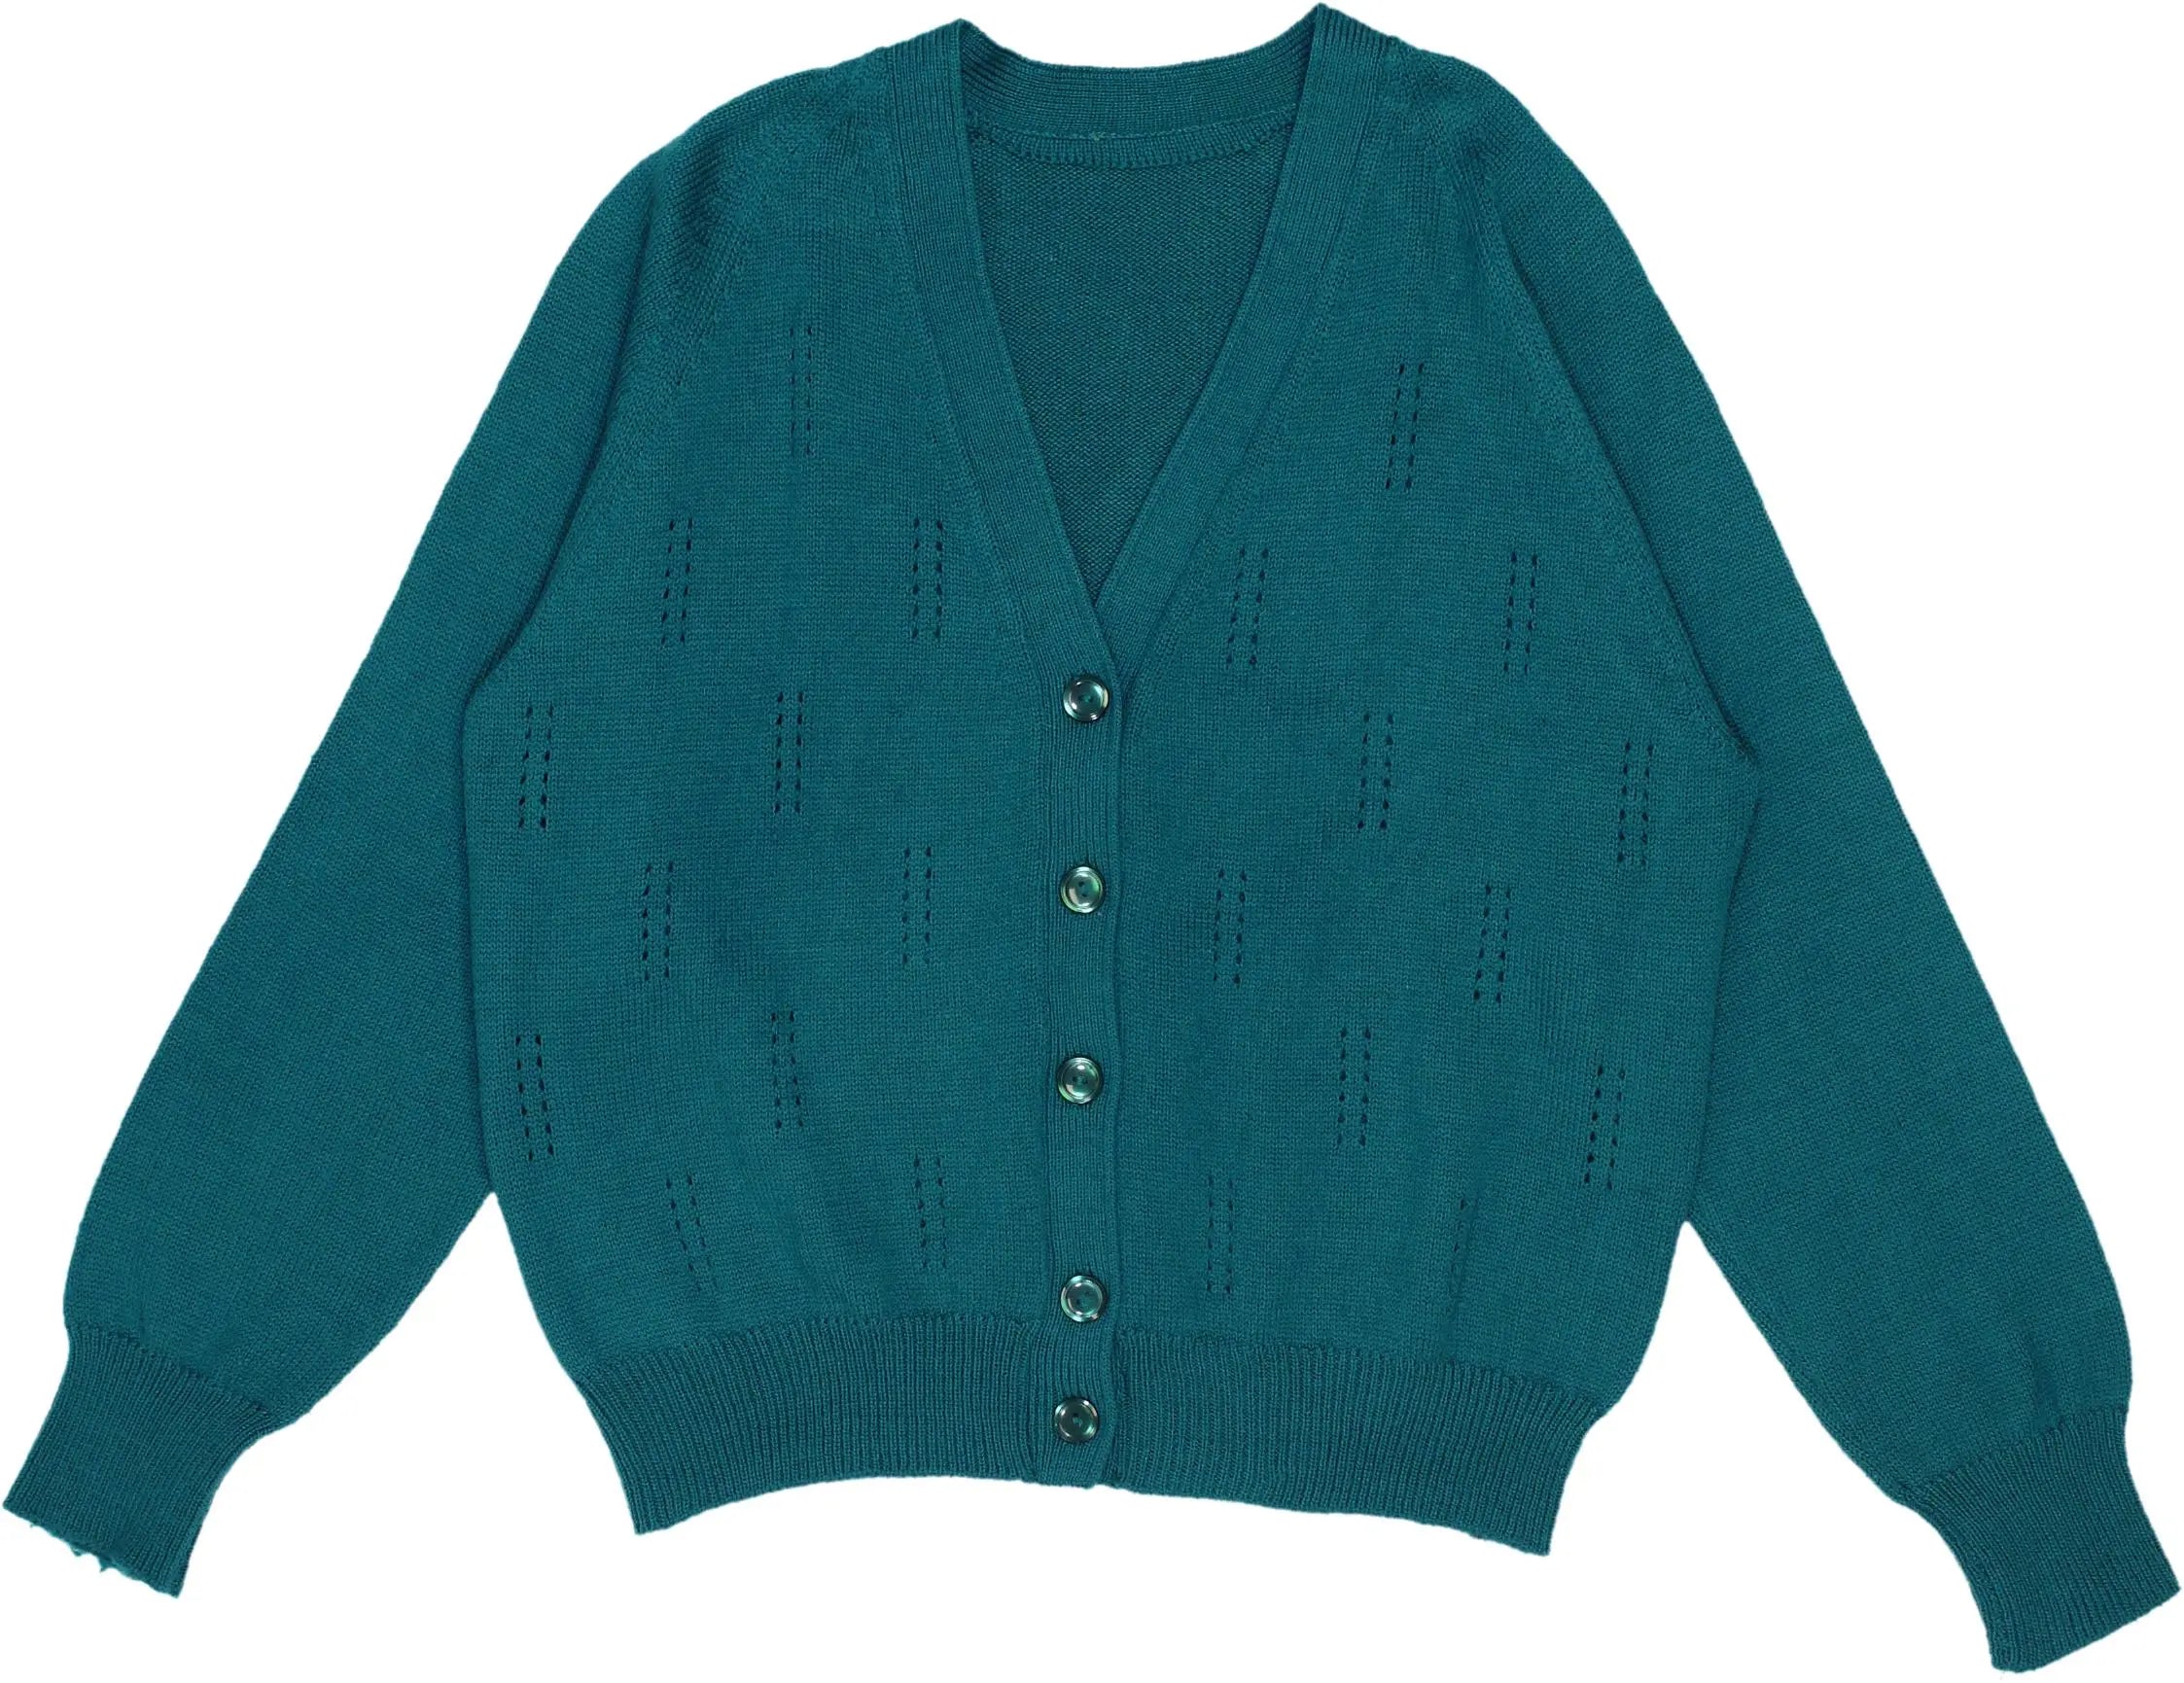 Unknown - Knitted Cardigan- ThriftTale.com - Vintage and second handclothing